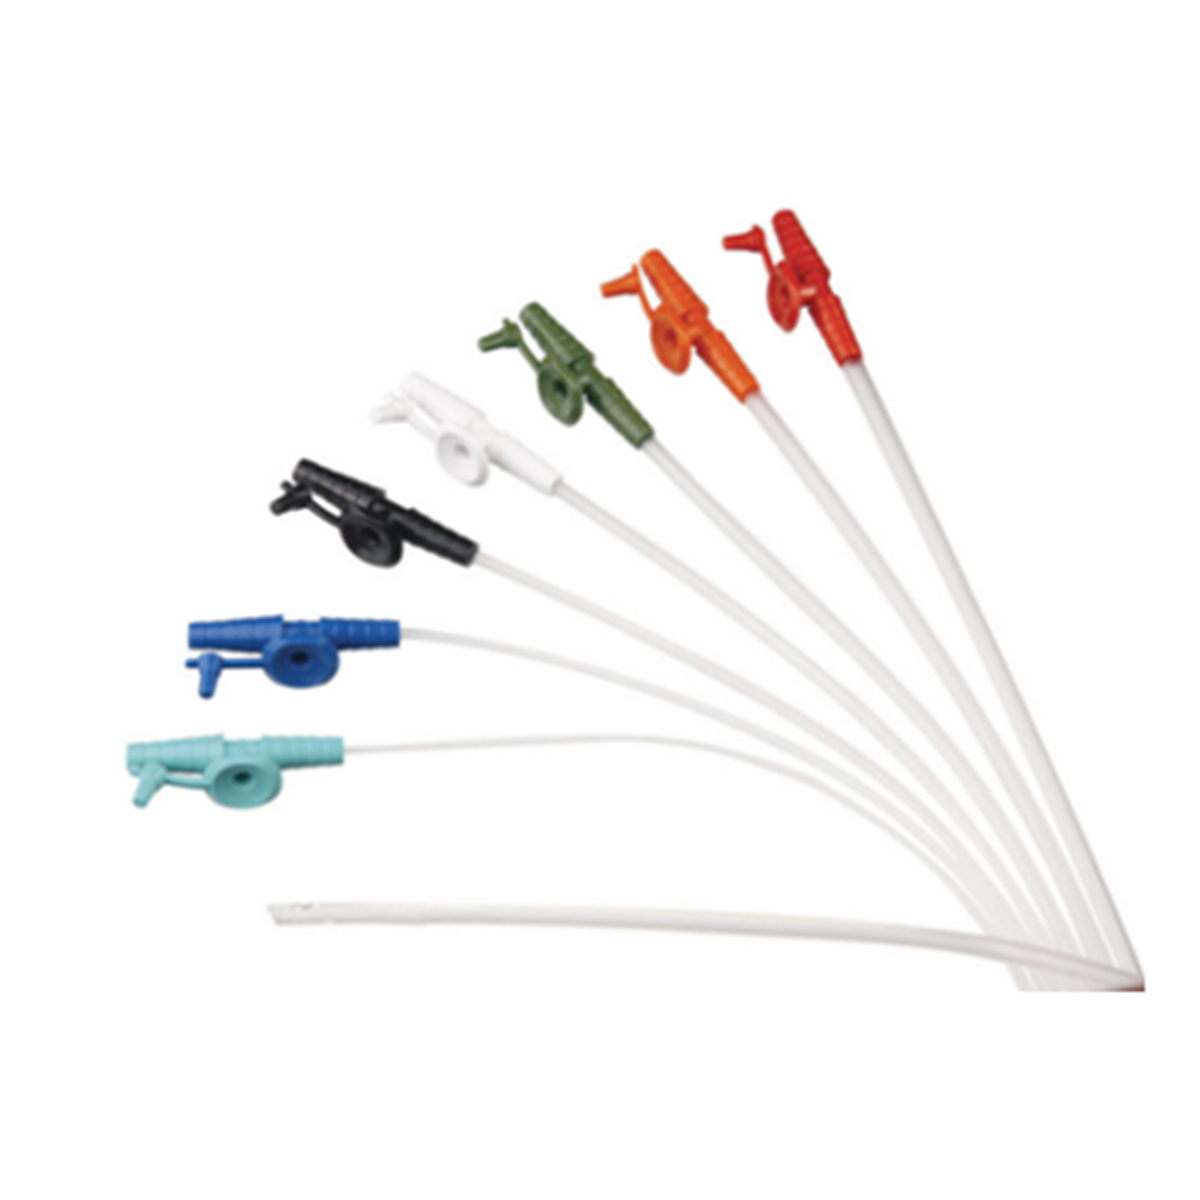 DNR Wheels - Unomedical Mully Suction Catheters Vacutip 